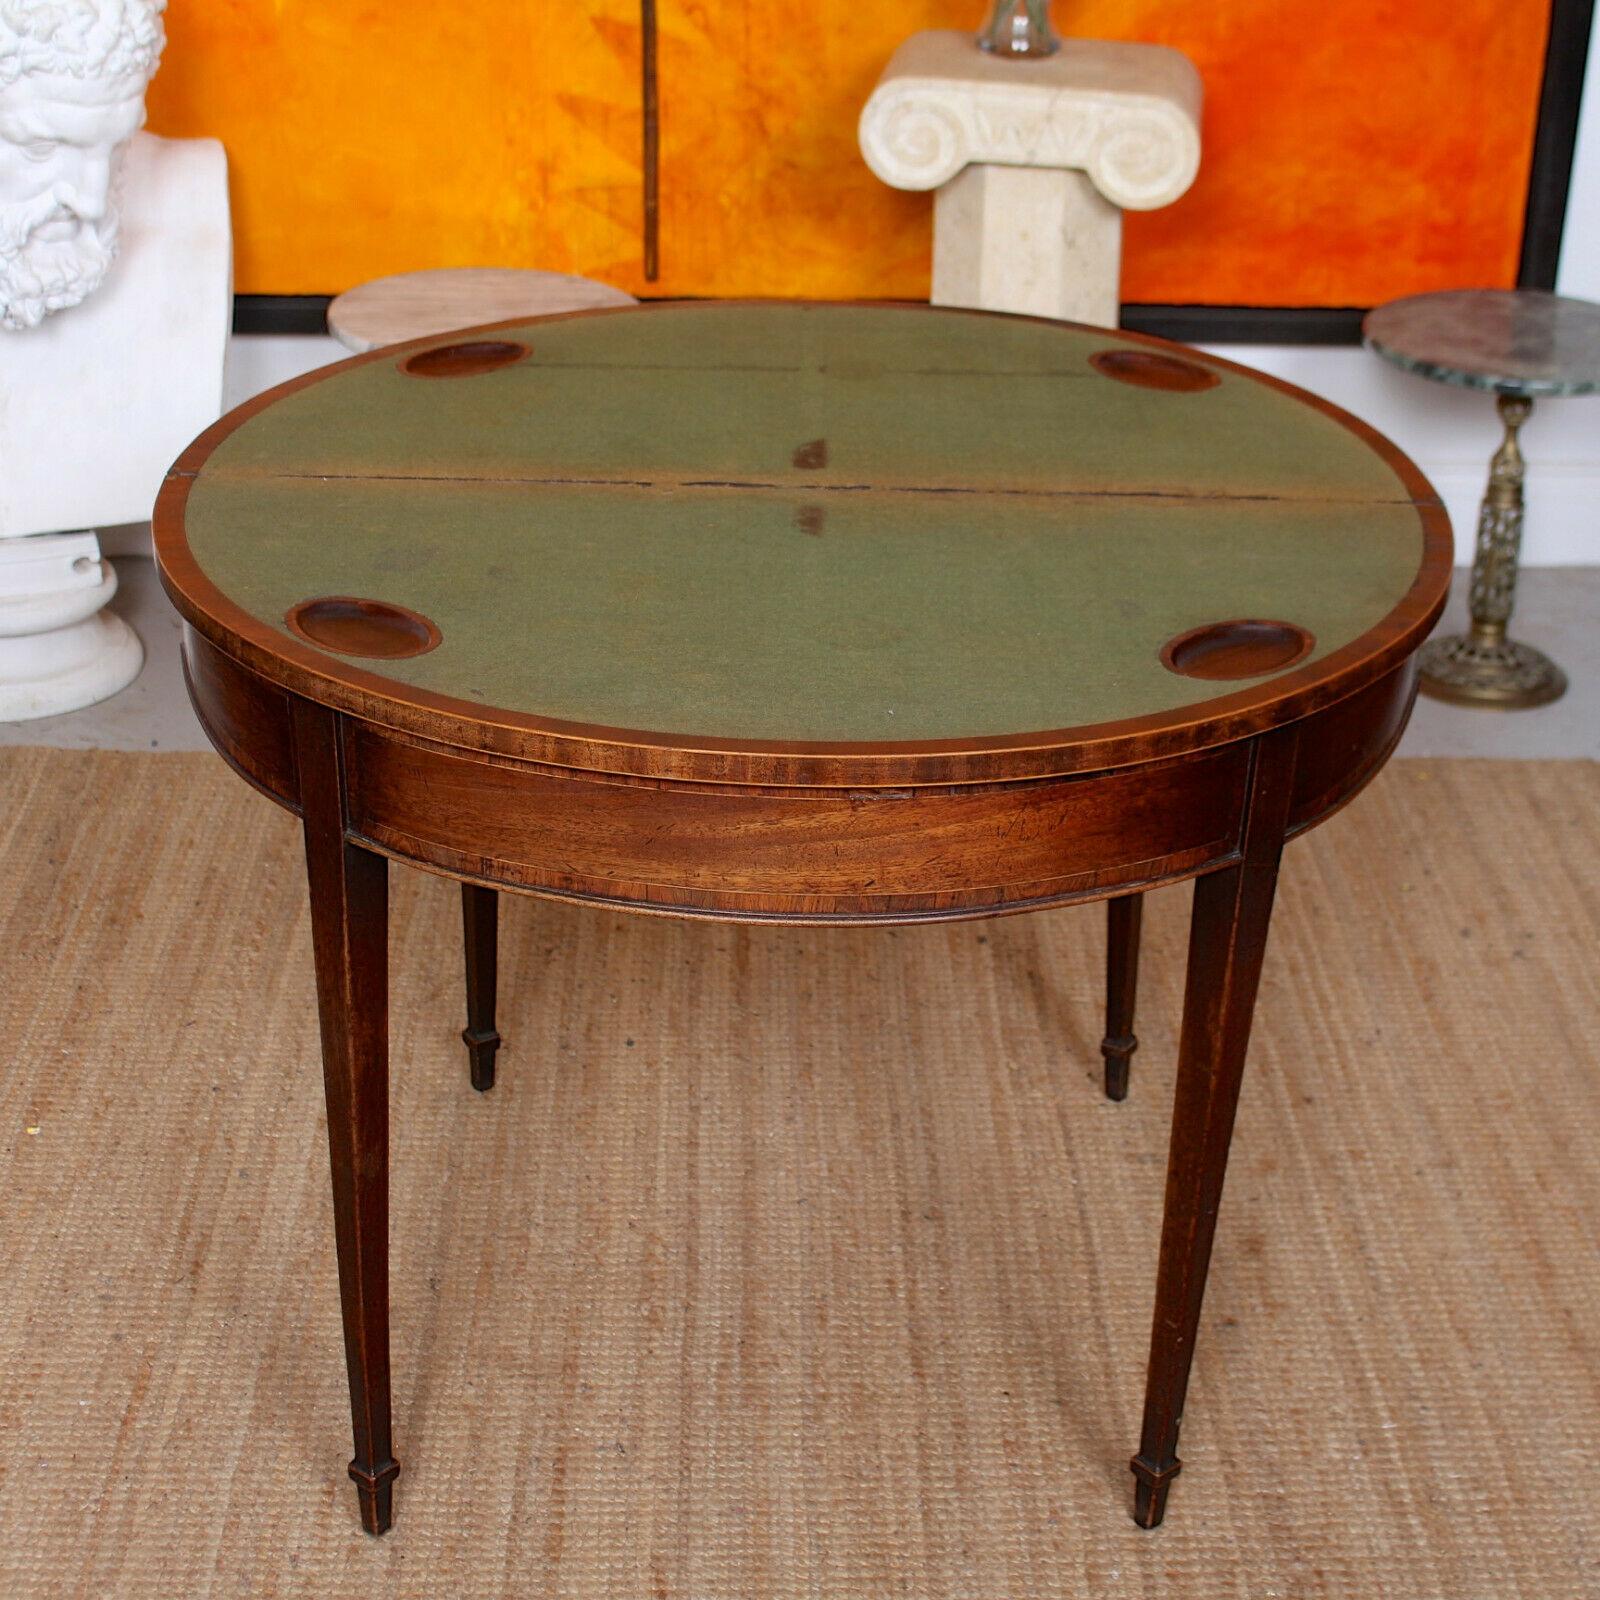 English Antique Demilune Card Table Victorian Circular Mahogany Folding Console For Sale 2